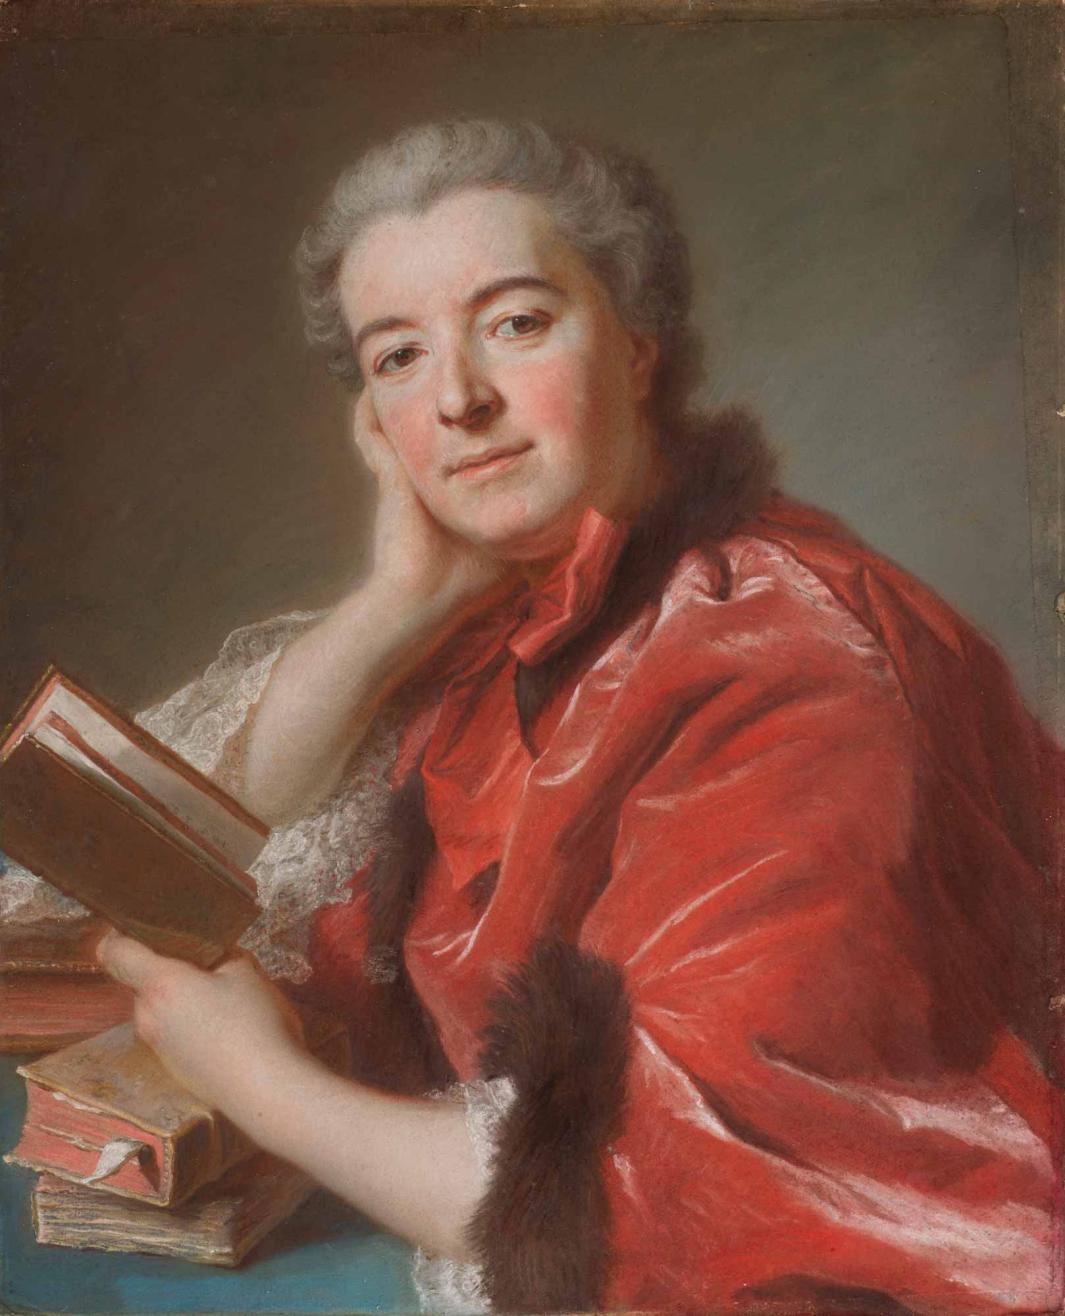 *A gray-haired woman in a pink coat with brown fur trim leans on a table with books on it, holding a book in her left hand while she looks out at the viewer, her right hand resting on her right cheek*